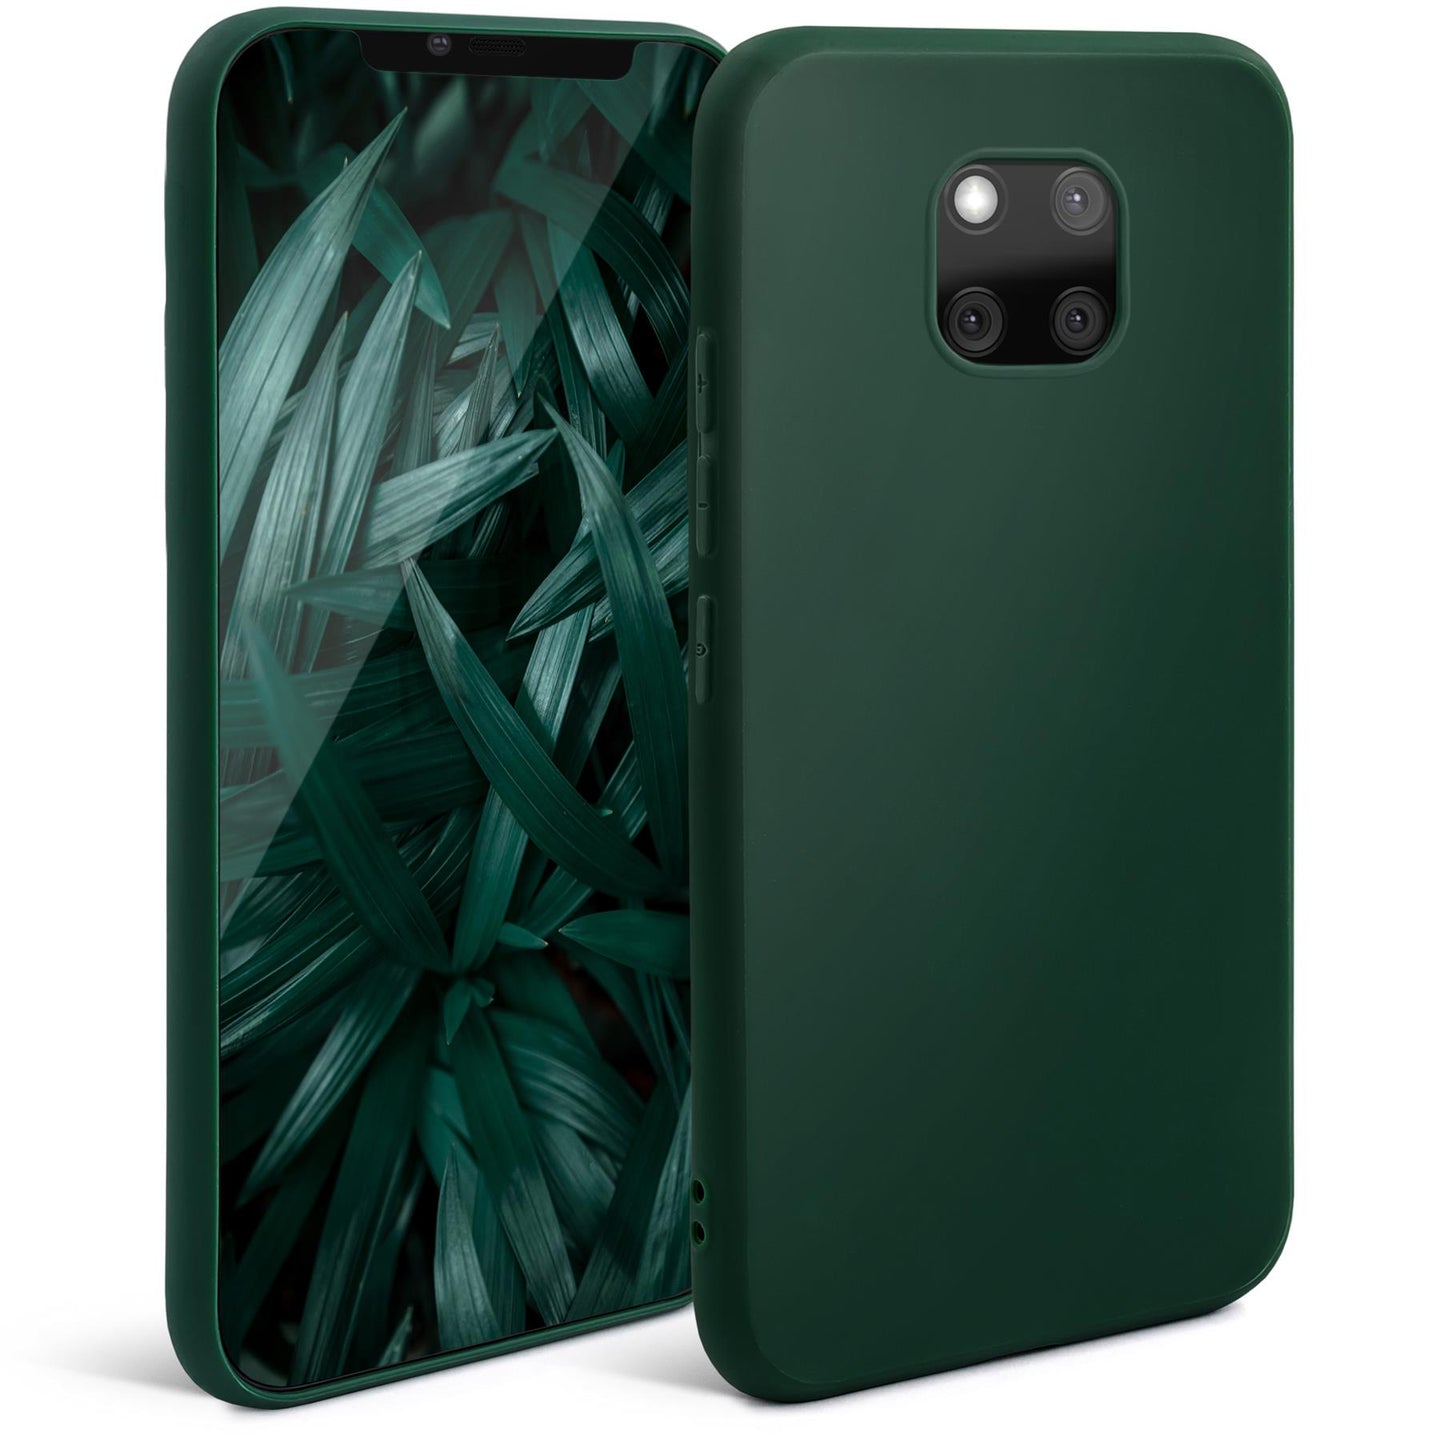 Moozy Minimalist Series Silicone Case for Huawei Mate 20 Pro, Midnight Green - Matte Finish Lightweight Mobile Phone Case Slim Soft Protective TPU Cover with Matte Surface